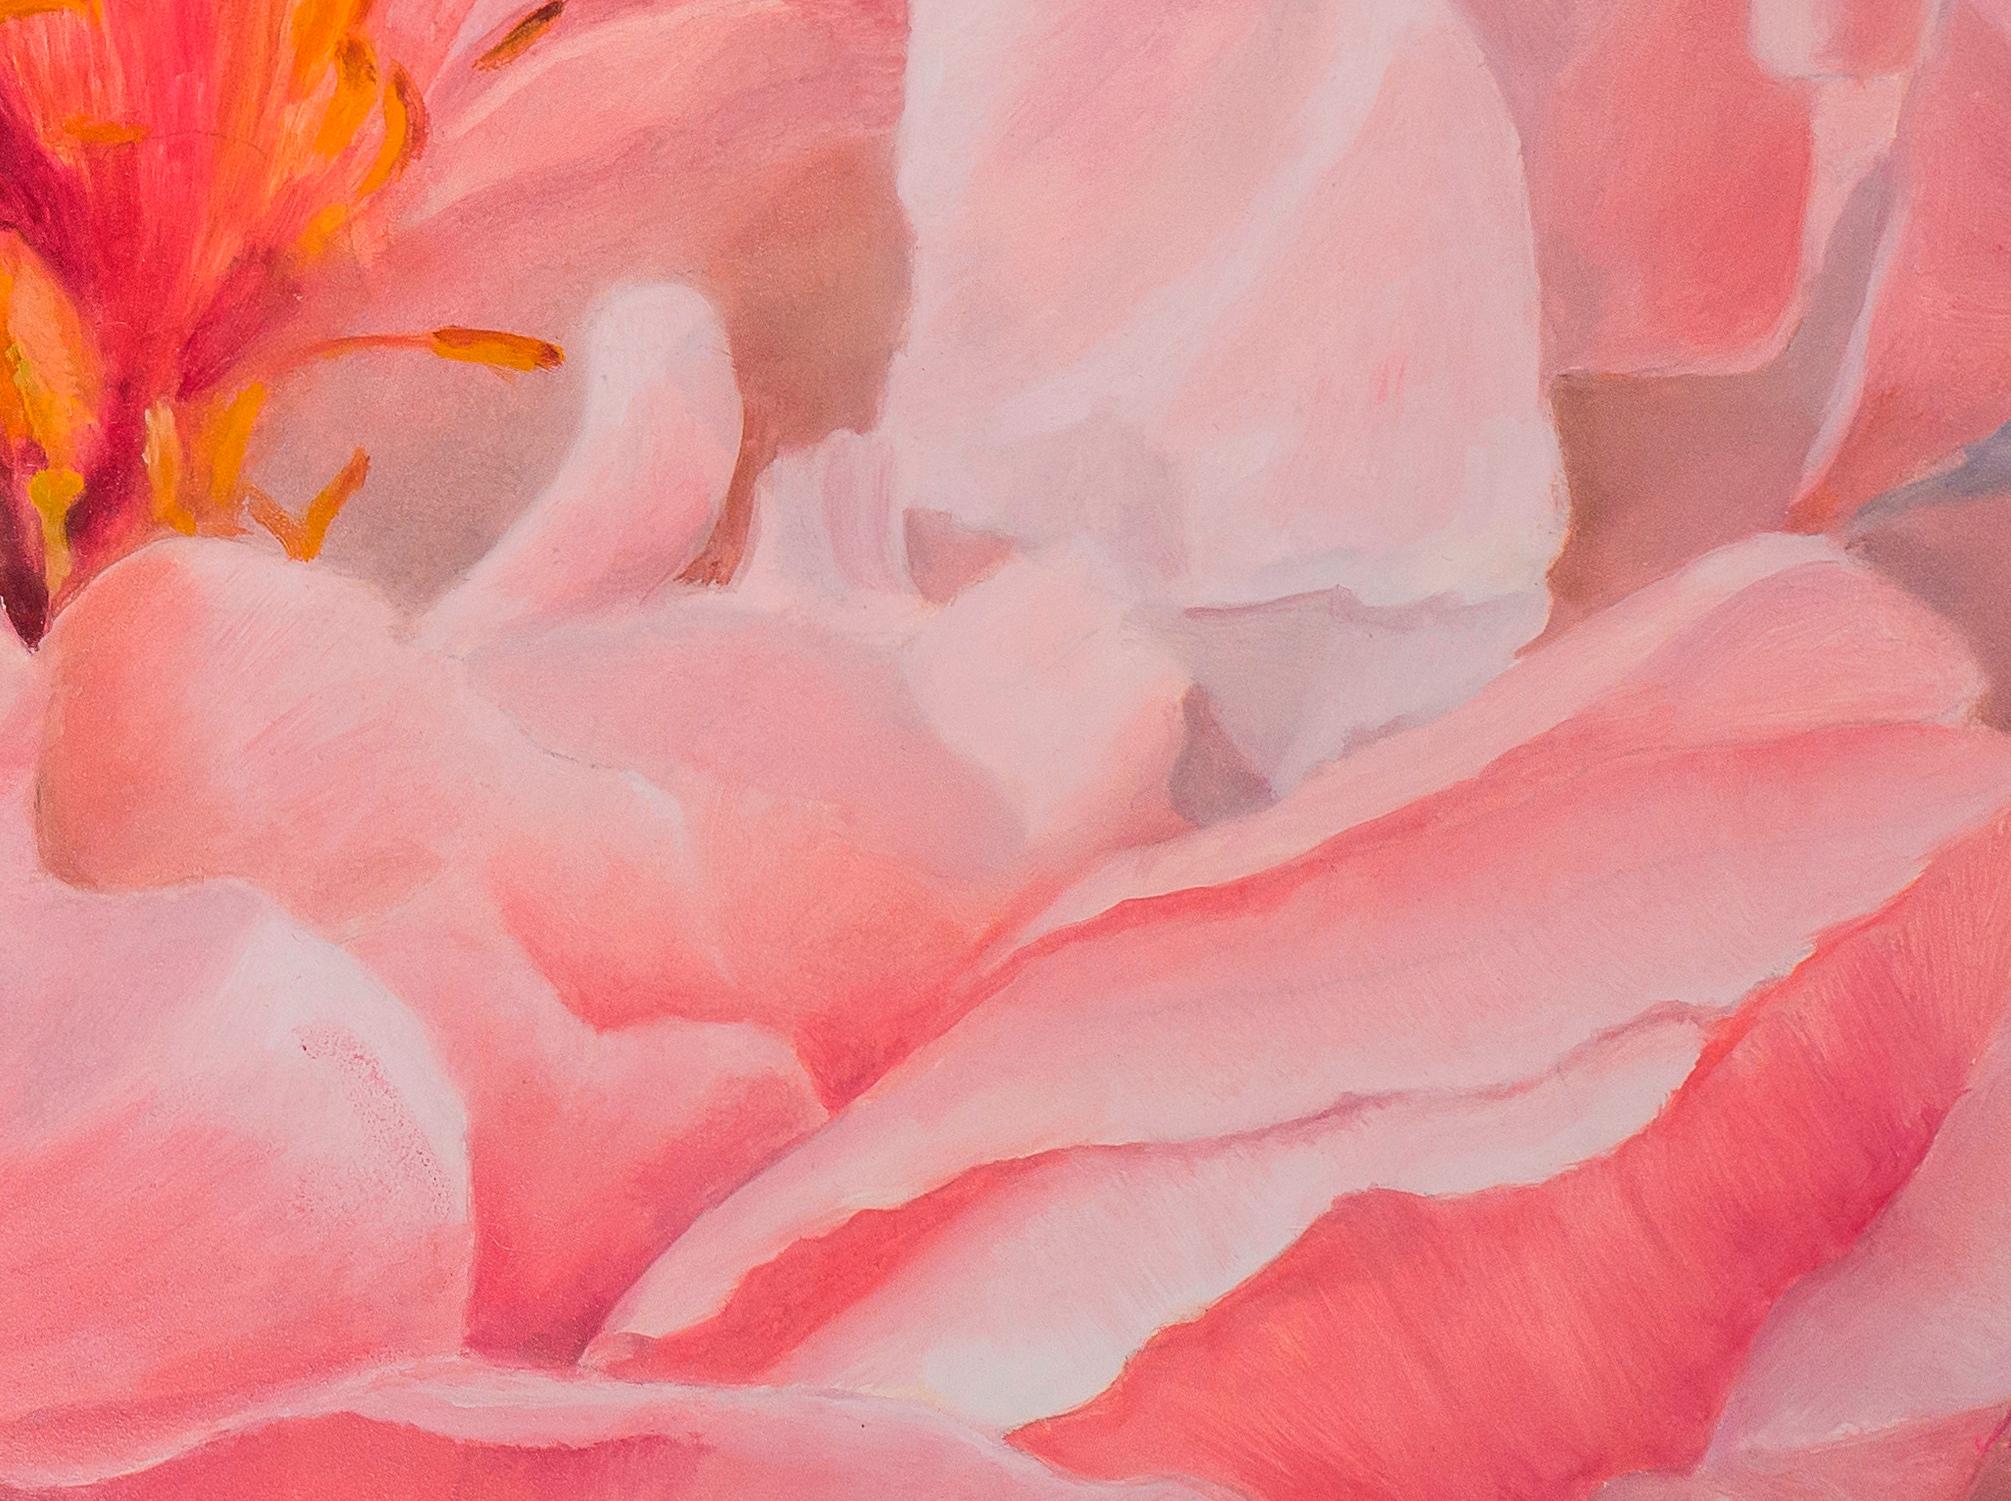 A display of peonies at the Malvern spring show provided the inspiration for this painting. The prize peony was floating in a silver bowl of water providing a beautifully delicate background idea for the painting.

Nicola has developed her work in